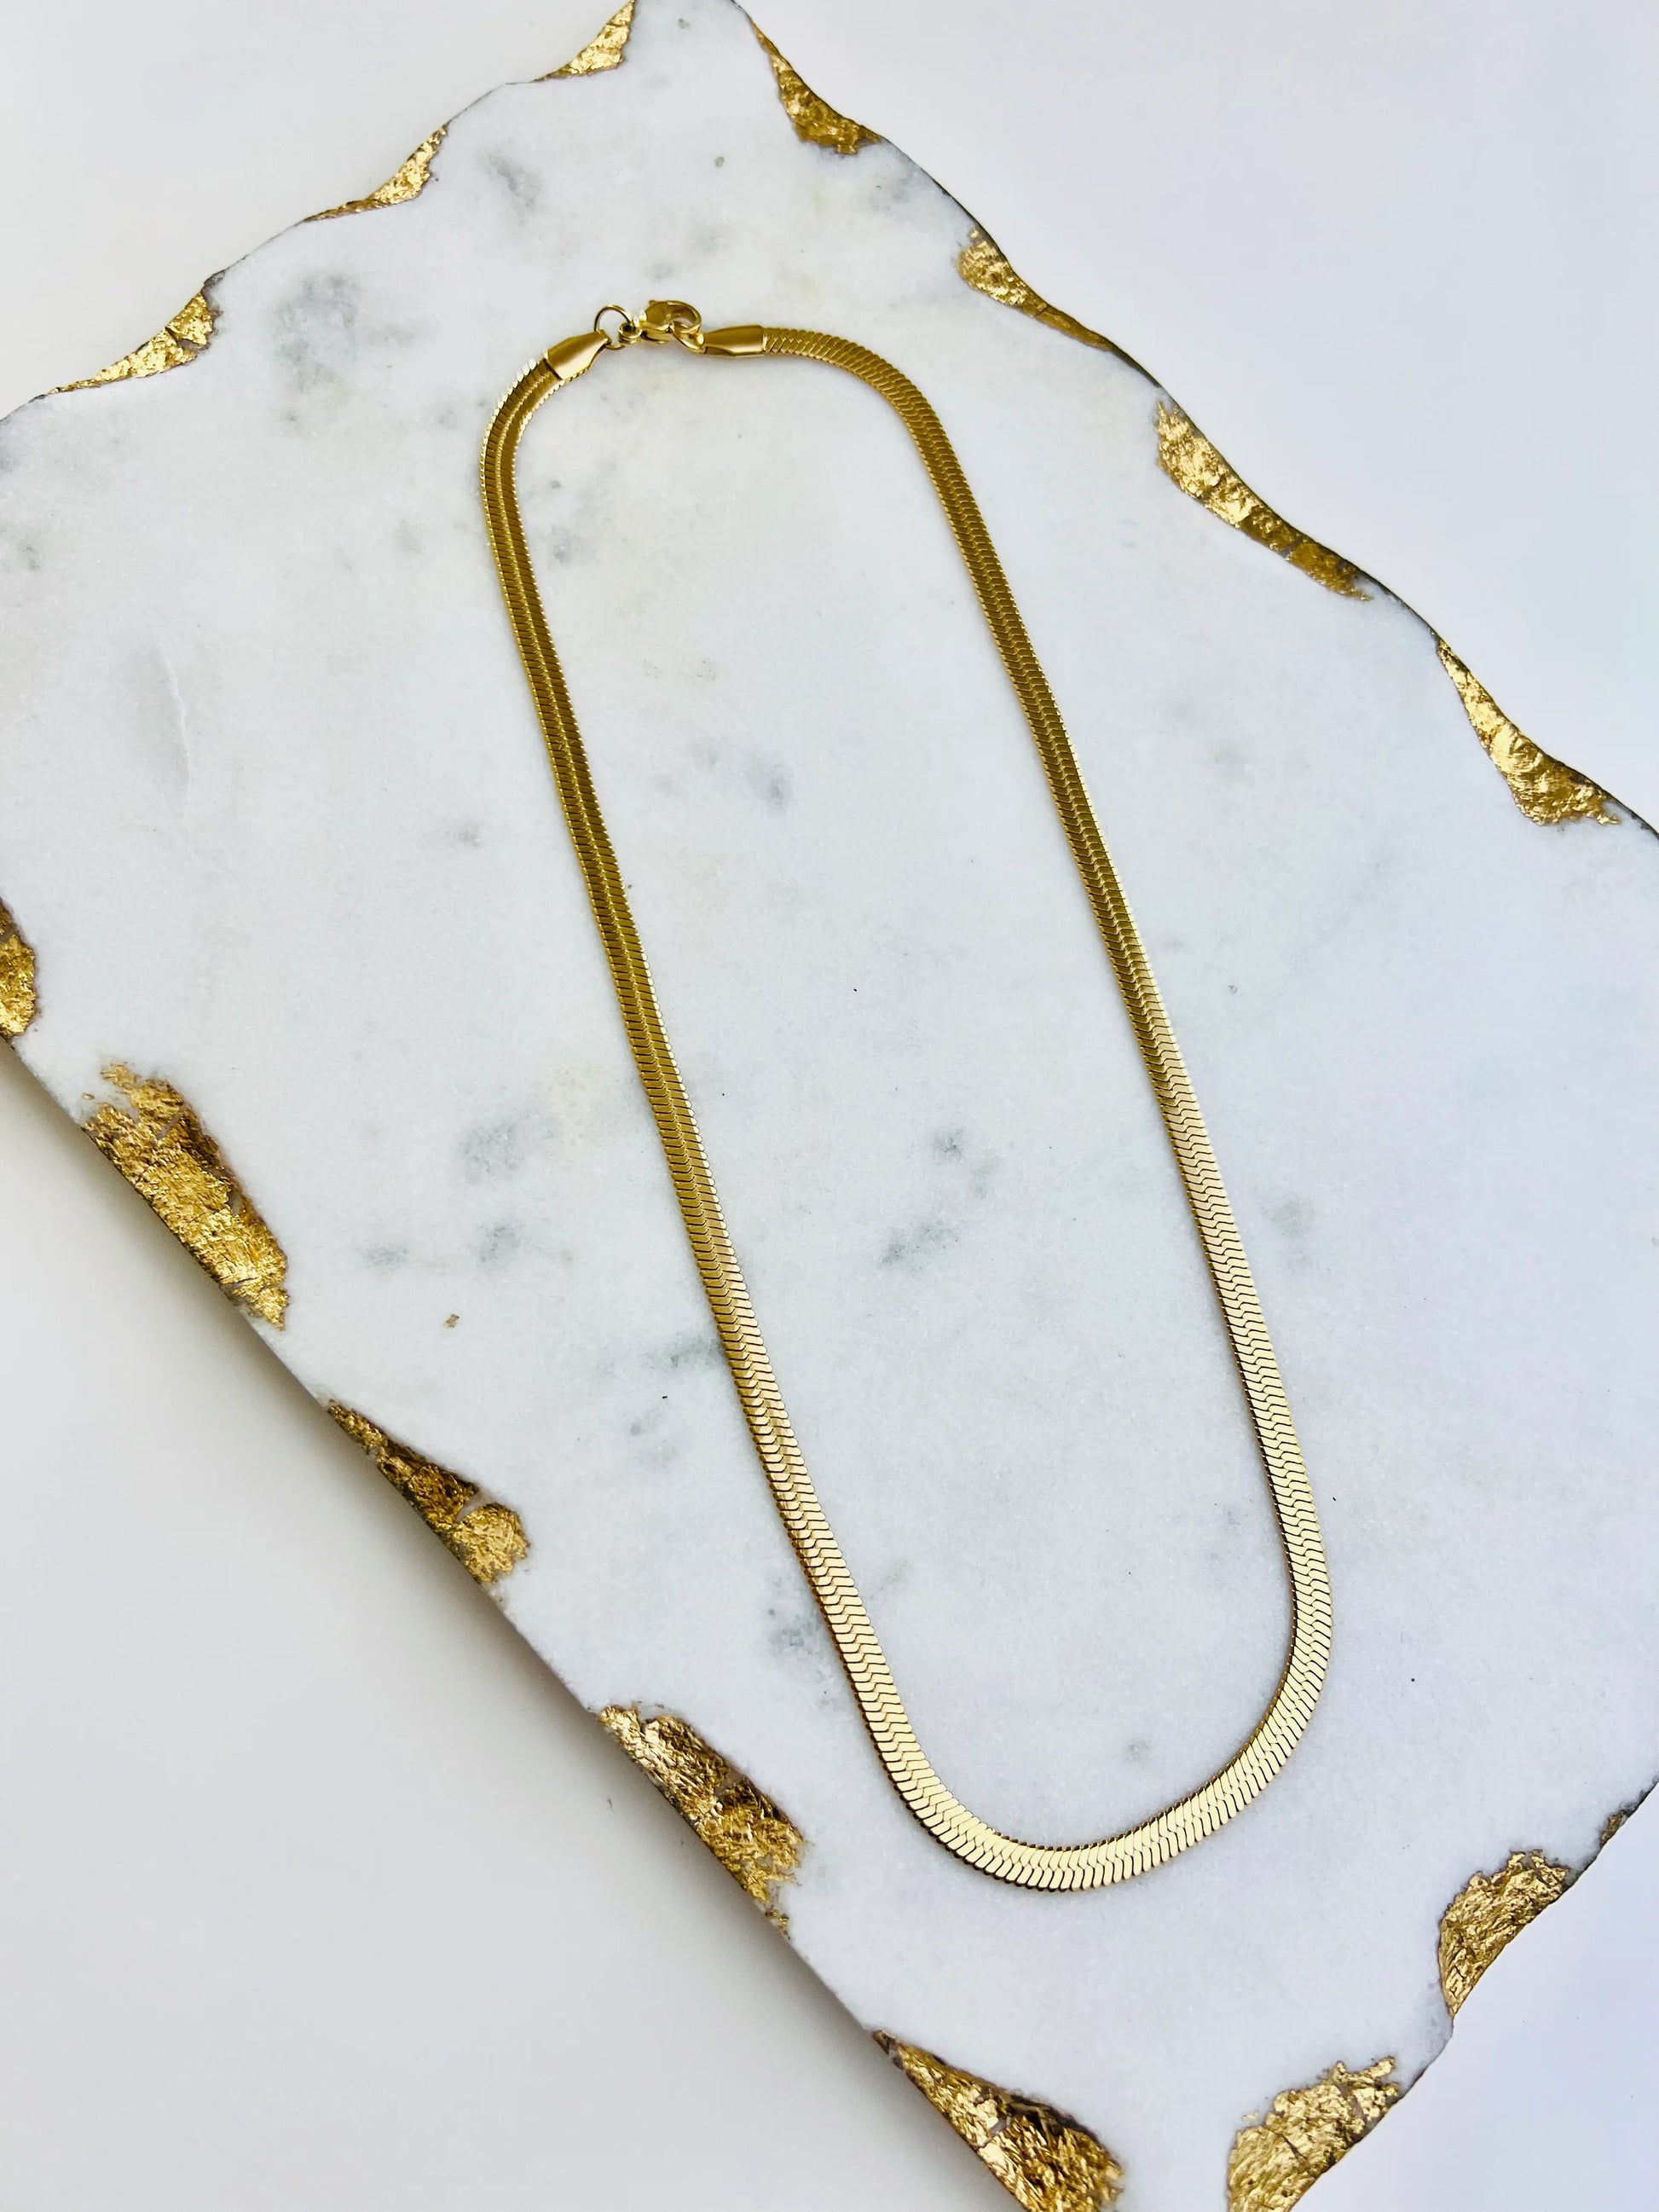 a Nicole Snake Necklace by Lacy Rae Jewelry on a marble surface.